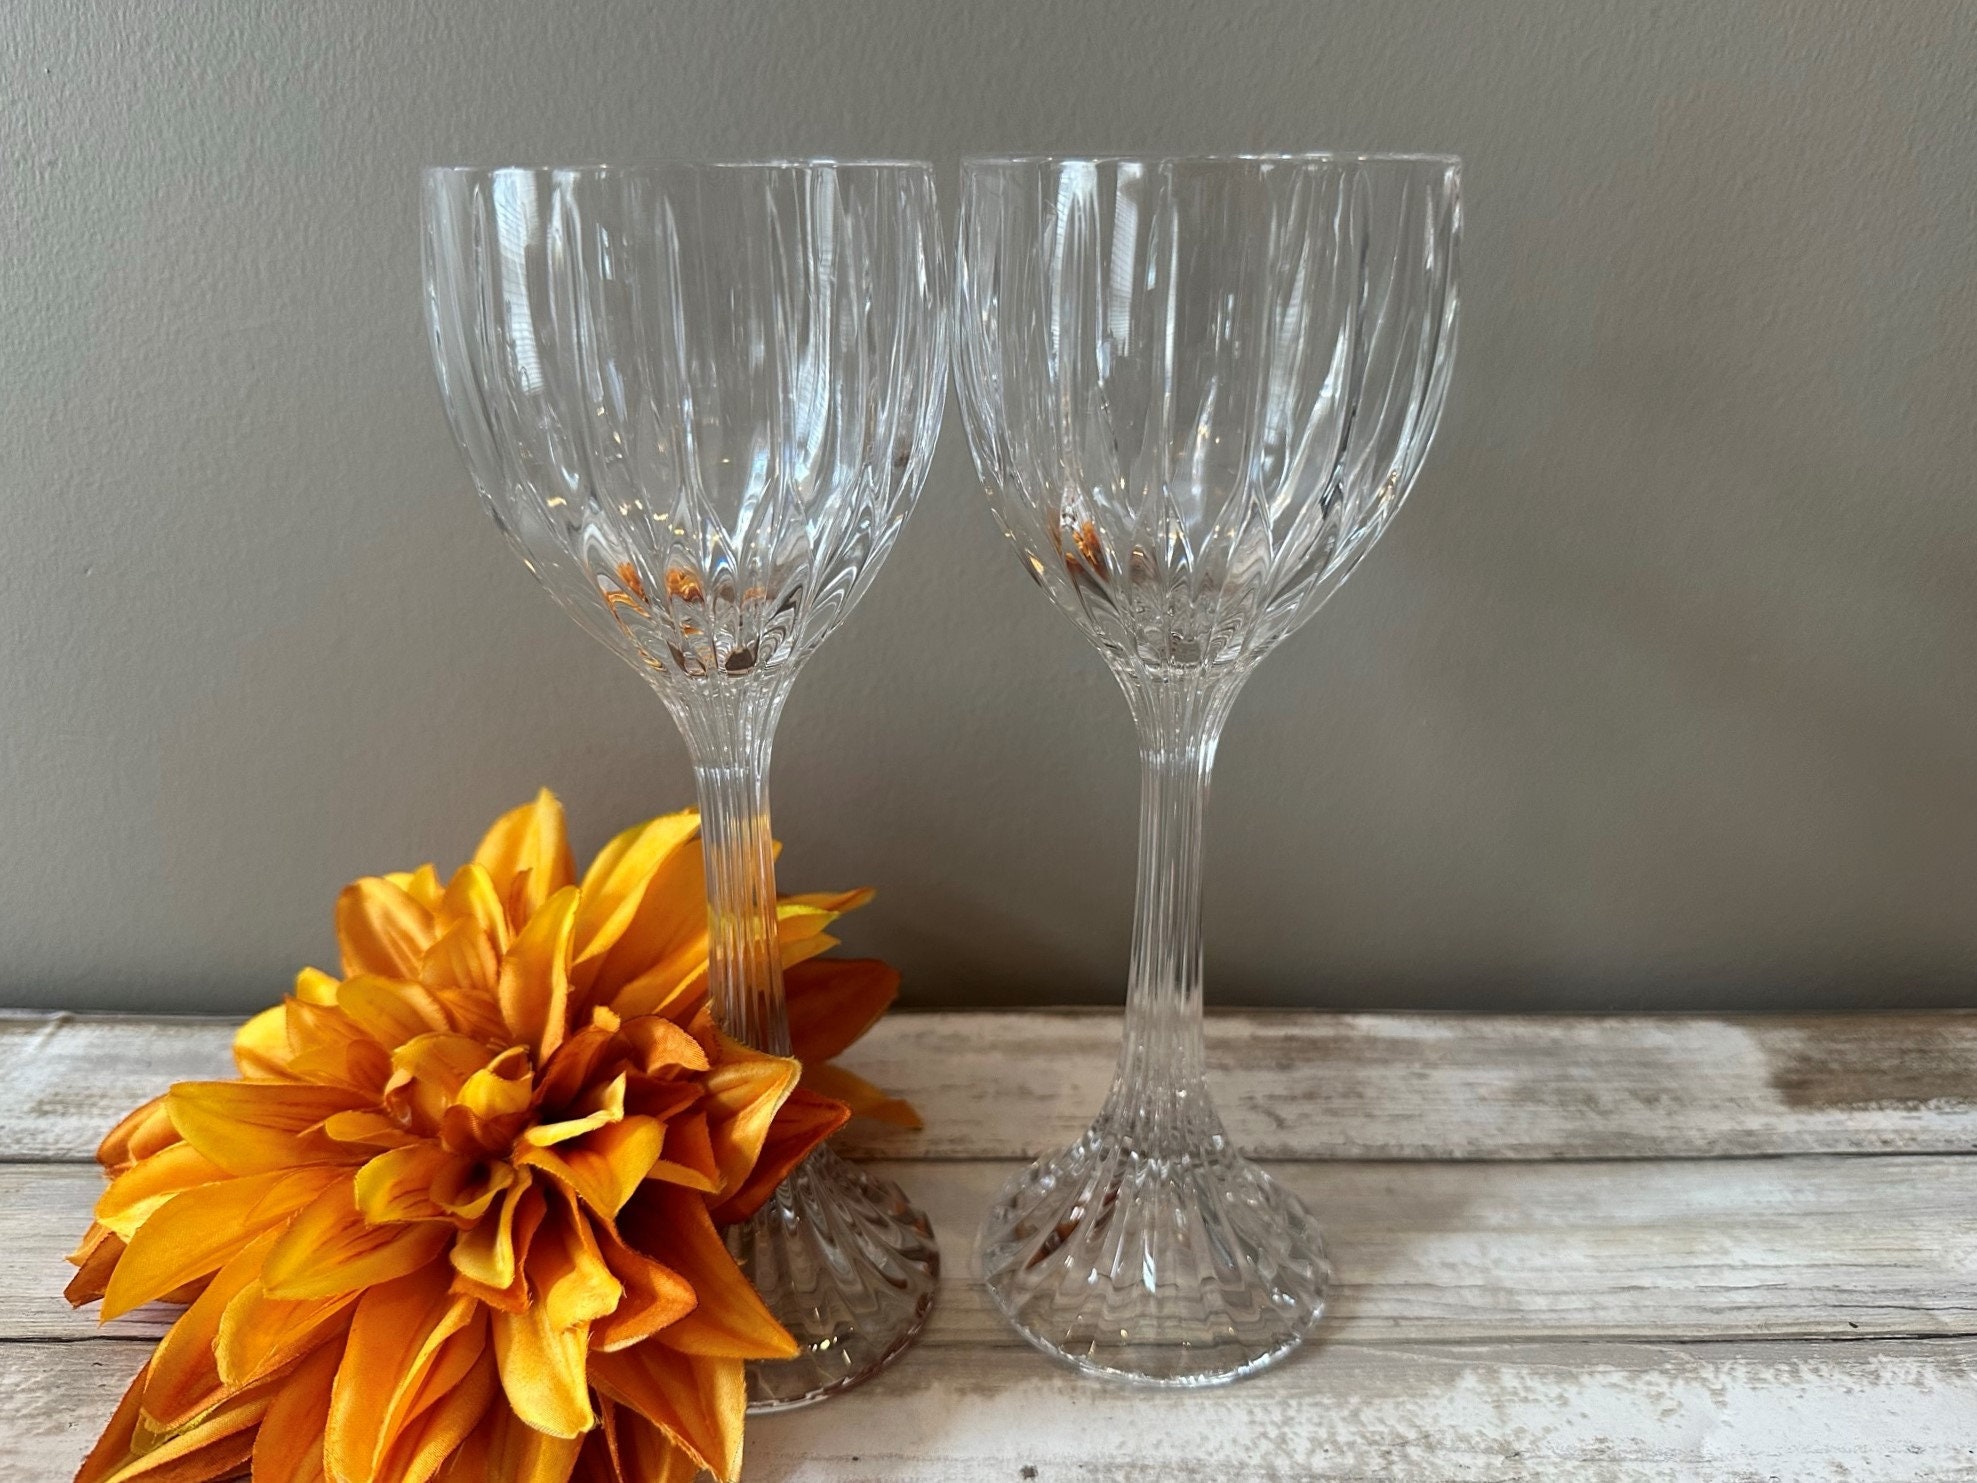 Super Cute Set of Three Vintage Drinking Glasses With Clouds